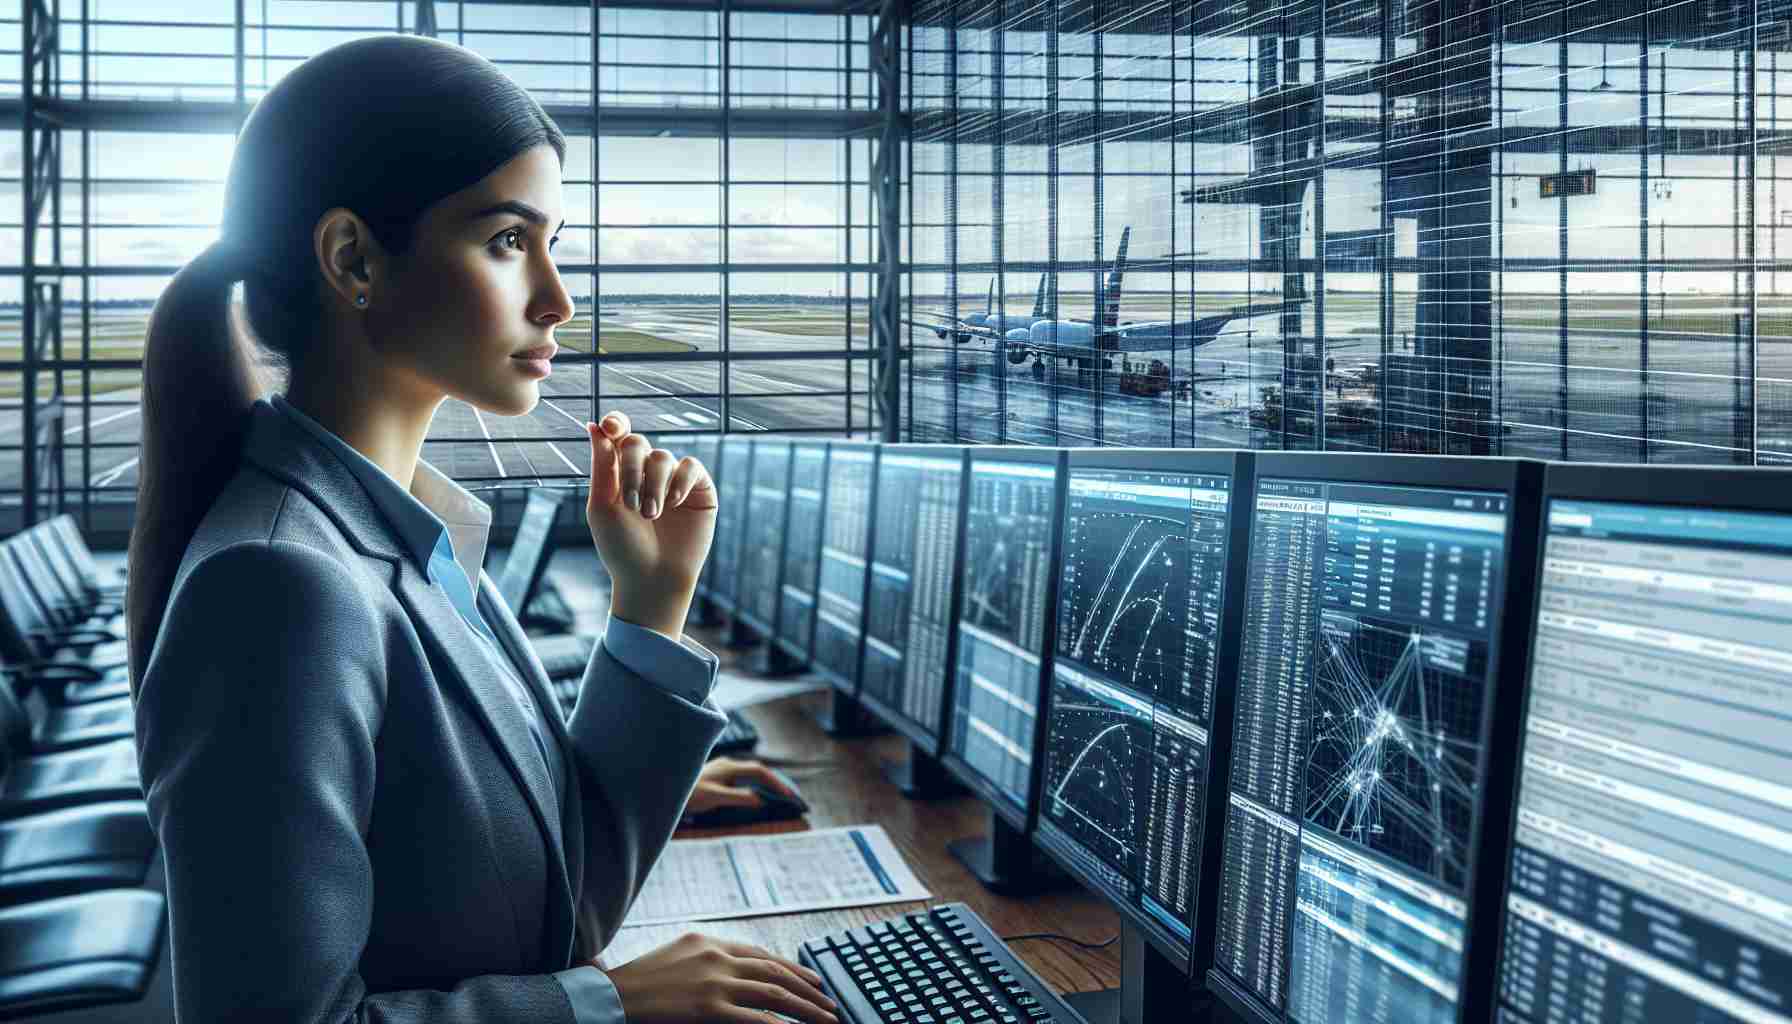 Detailed, high-definition depiction of an American airline business executive analyzing a departure scene at an airport. The executive is a Hispanic woman, looking thoughtful and professional, studying computer screens displaying various flight metrics and departure details, with a backdrop of large glass windows revealing a bustling runway. The image captures the intricacies and complexities involved in managing flight operations.